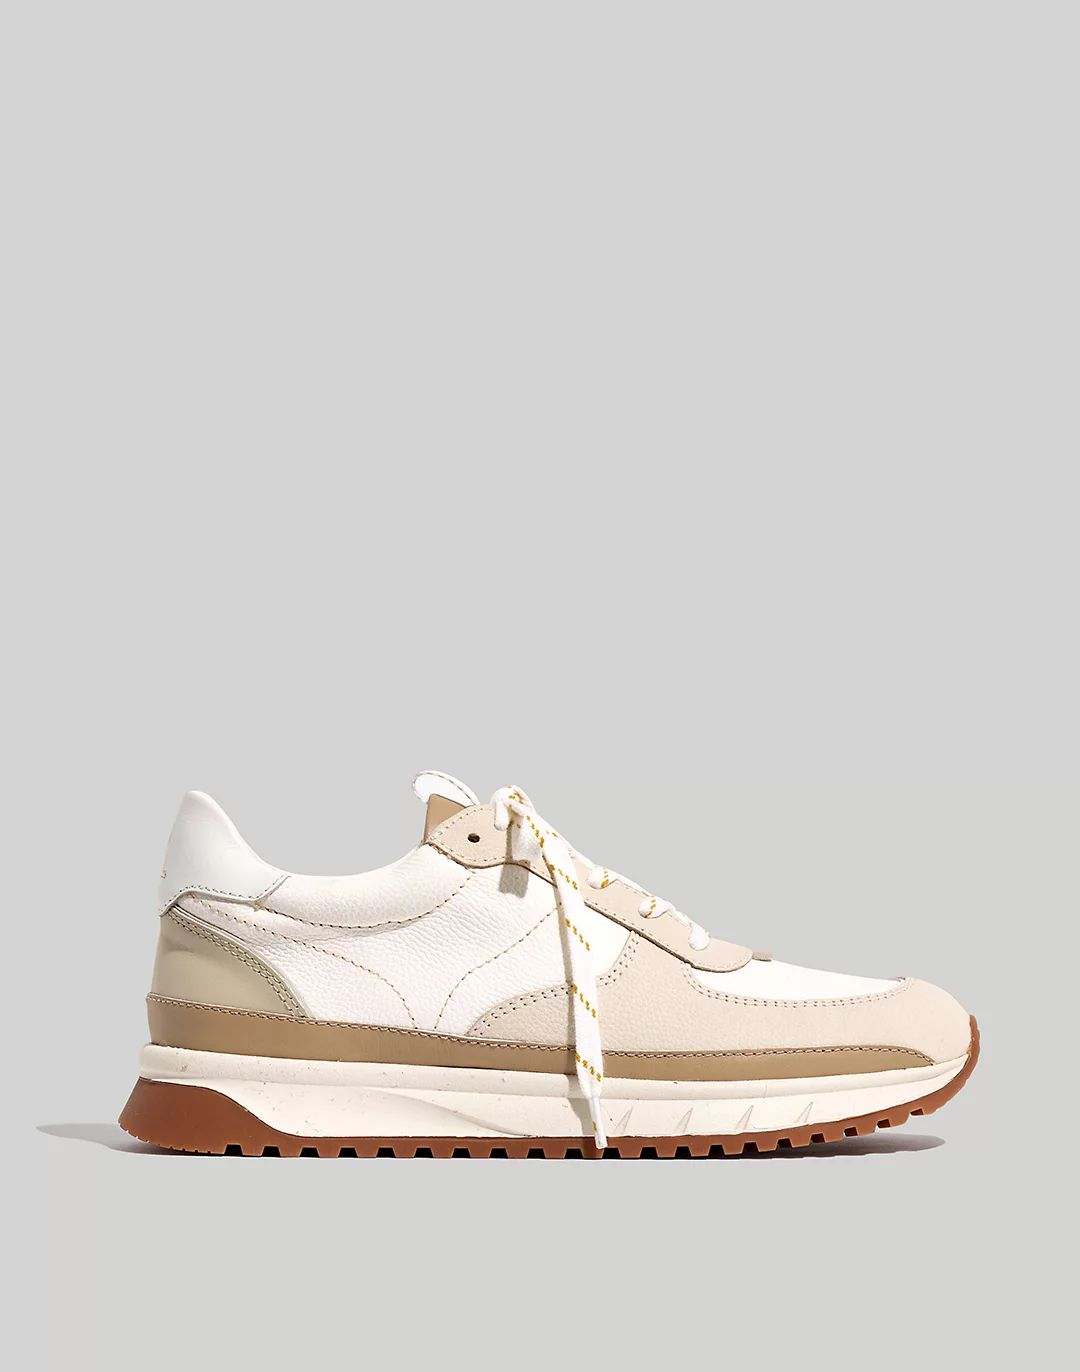 Kickoff Trainer Sneakers in Neutral Colorblock Leather | Madewell